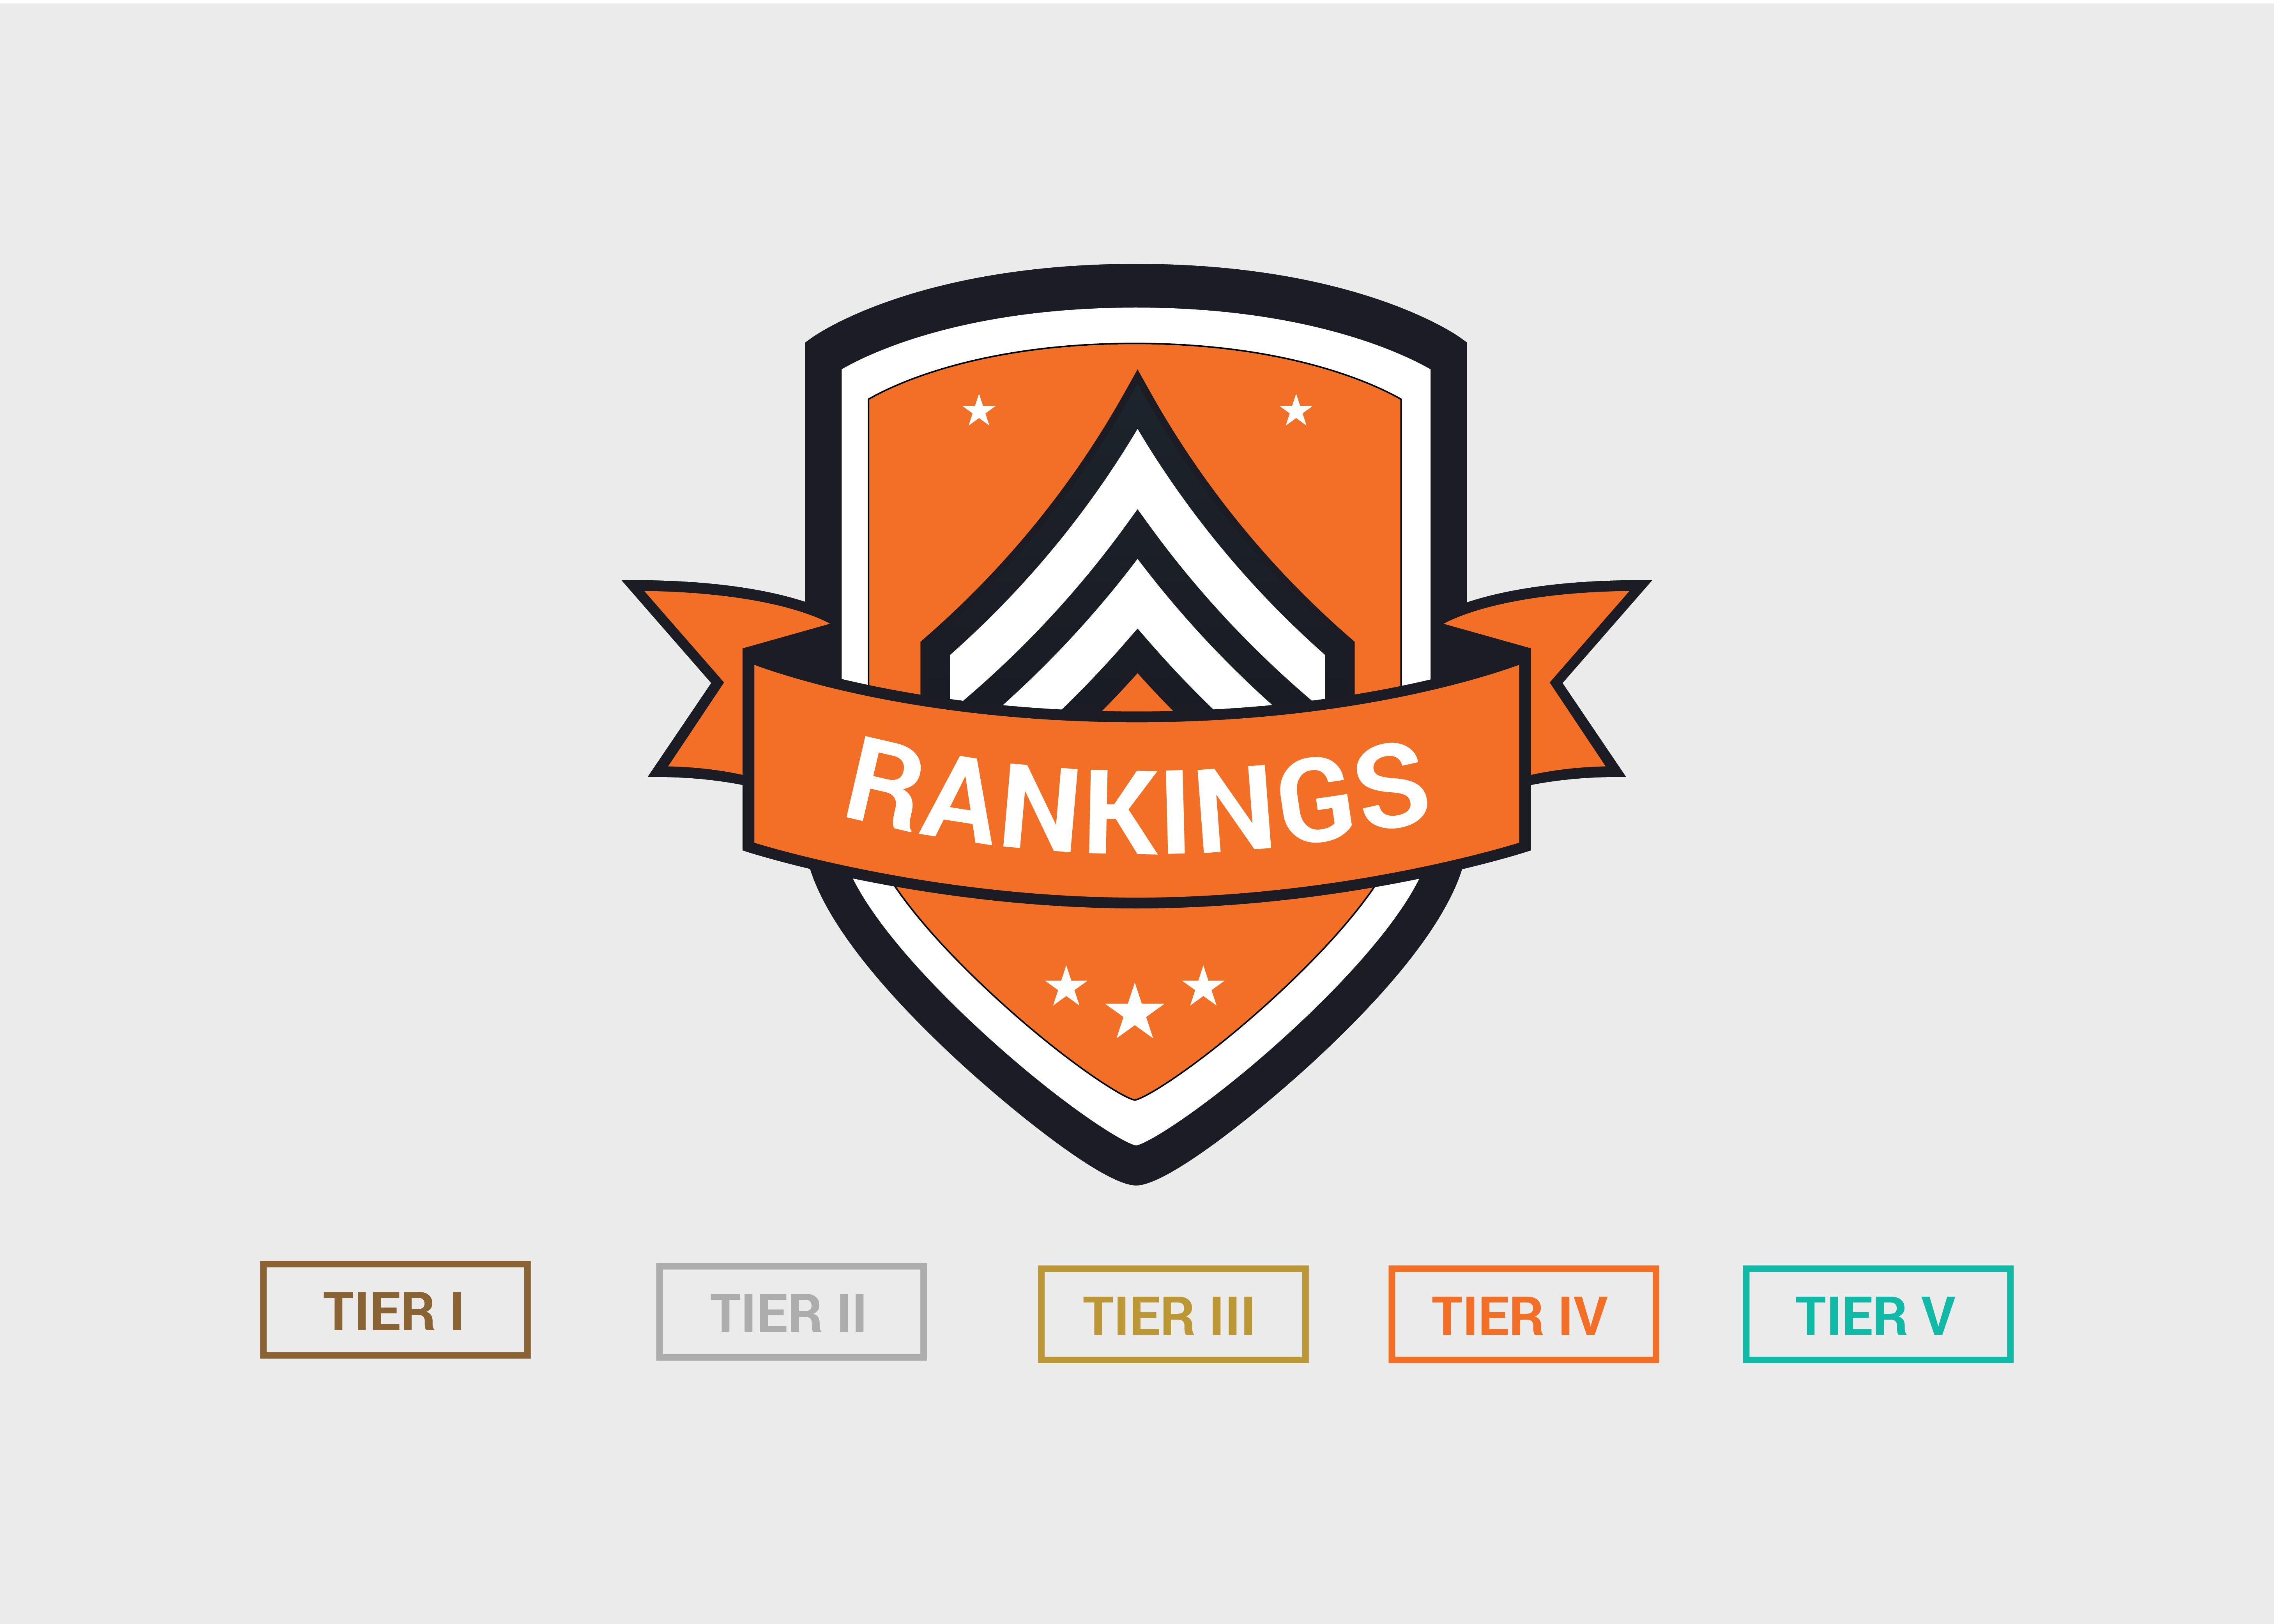 Introducing the Tiered Ranking System